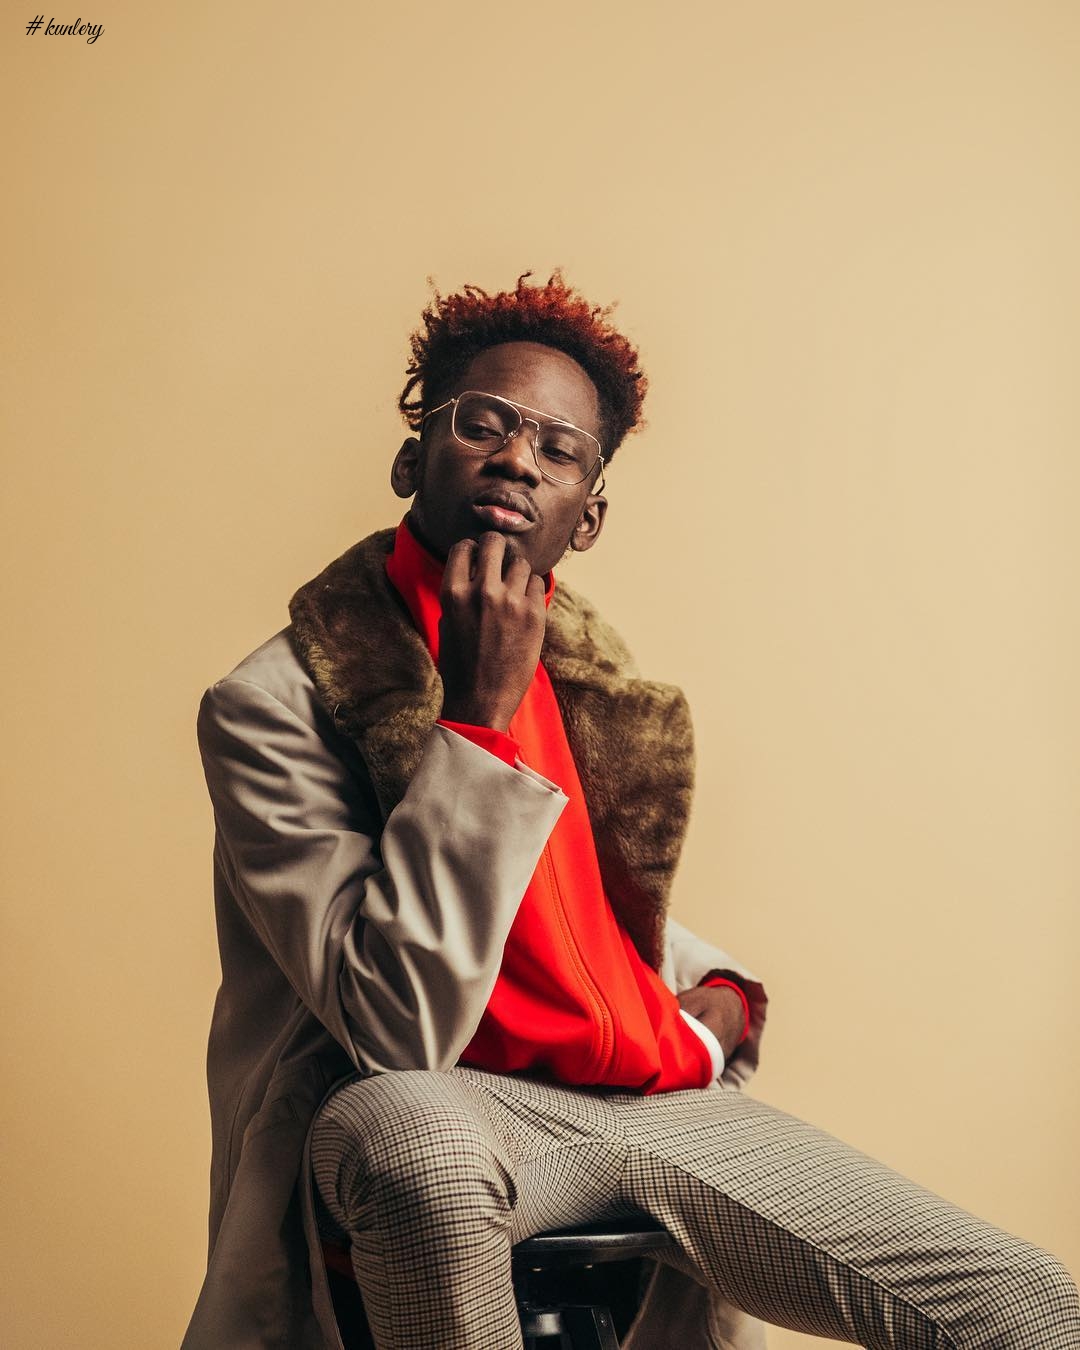 Mr Eazi Is The Cover Star For Viper Magazine’s ‘The Nomad’ Issue